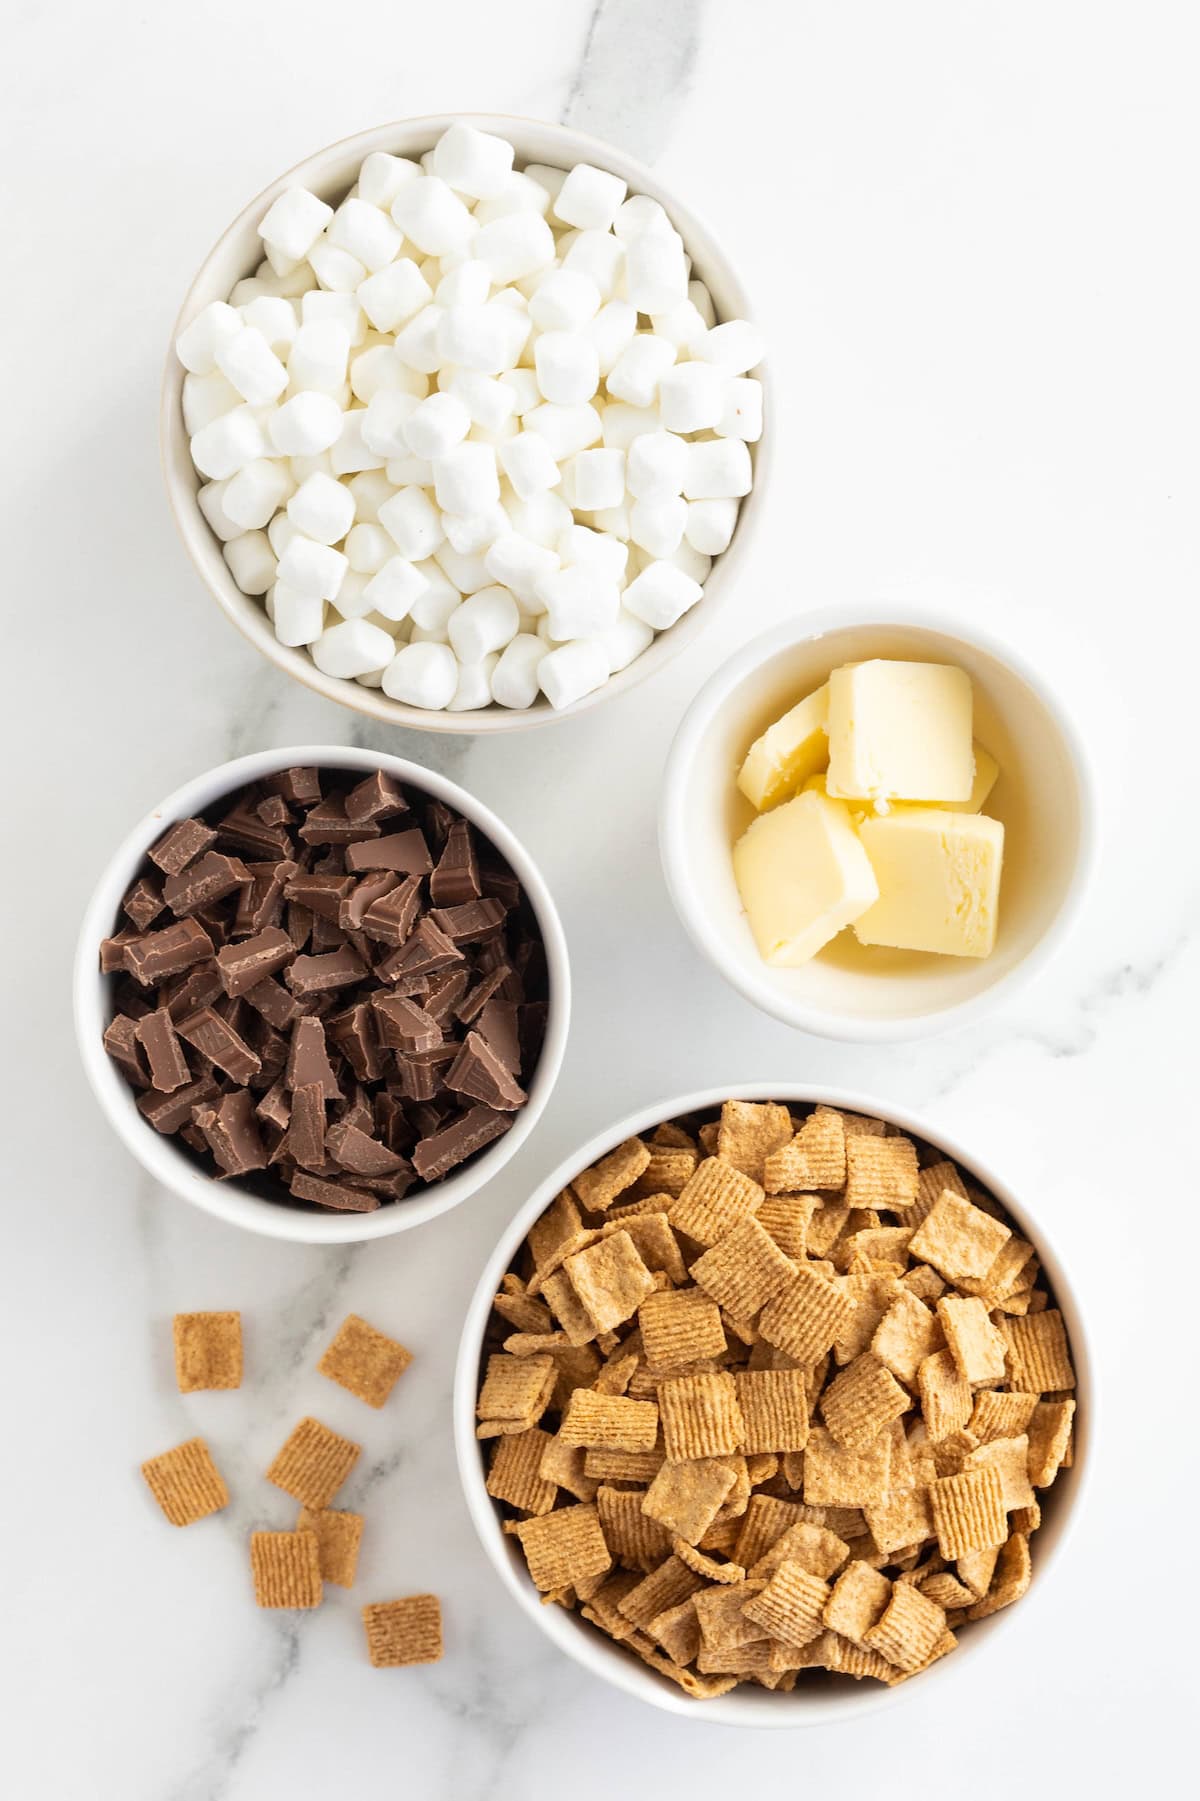 Ingredients to make No-Bake S'mores Treats in small white glass dishes on a white marble counter.